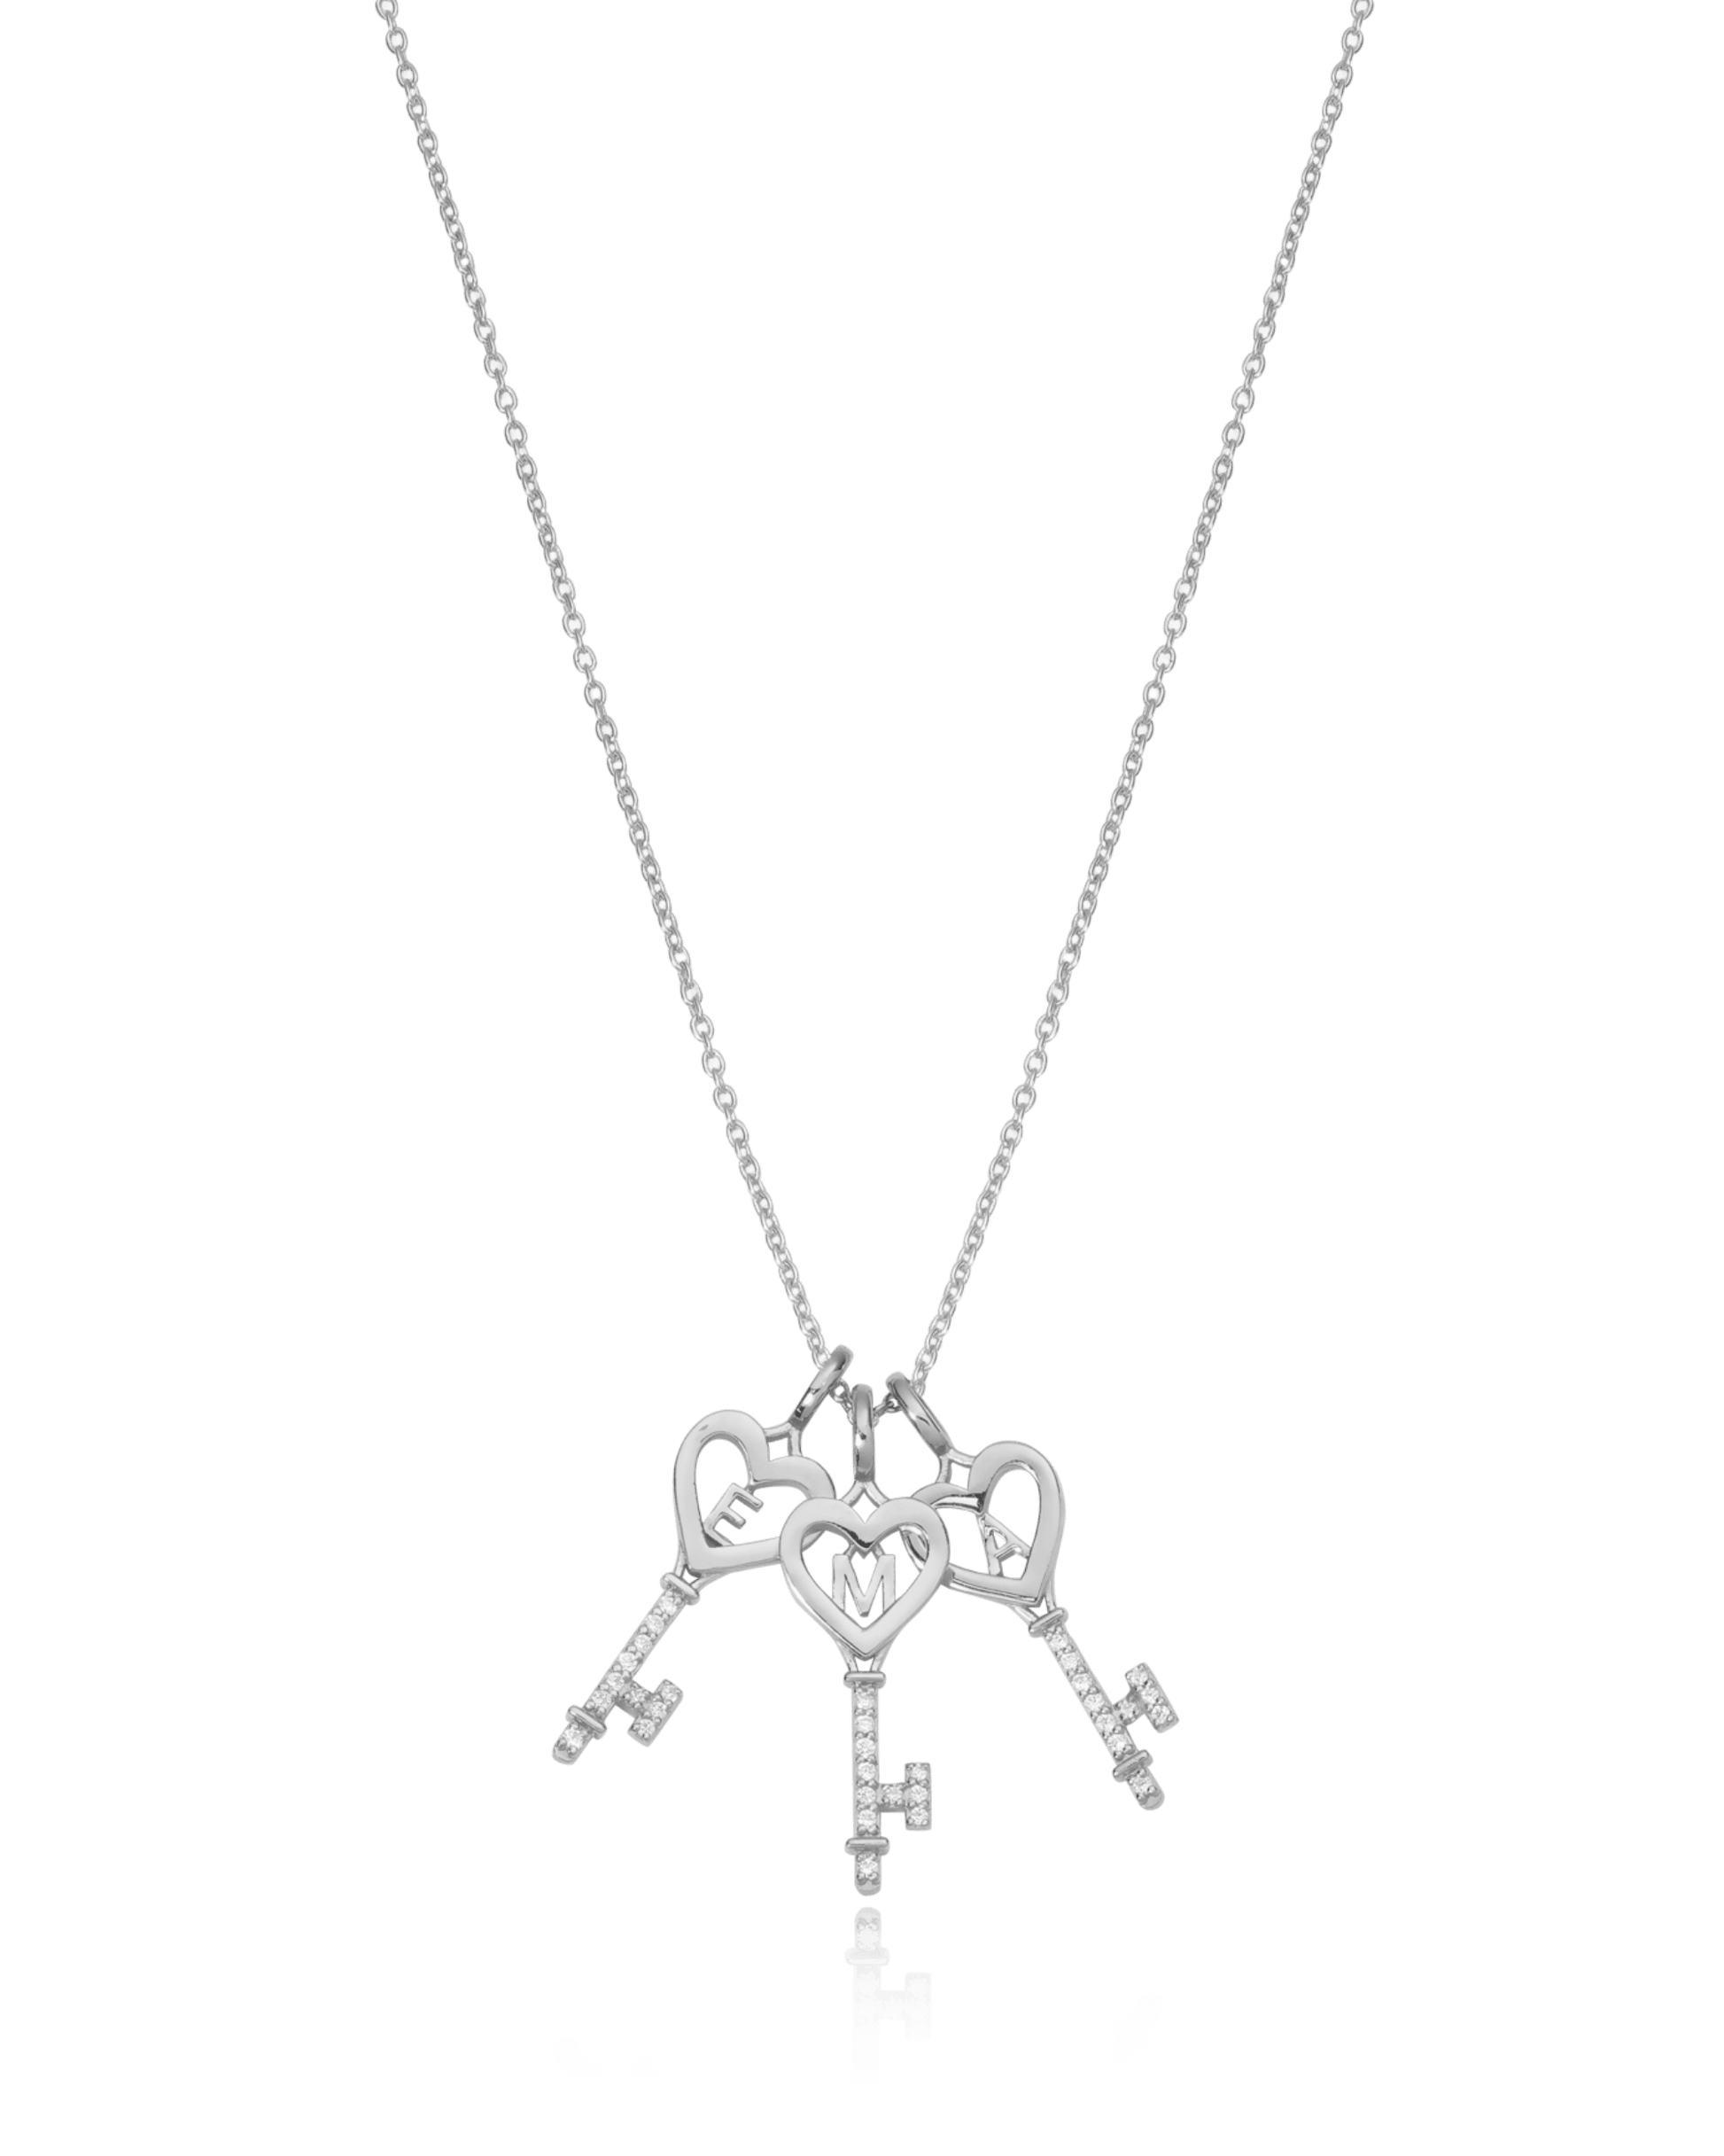 Key To My Heart - 925 Sterling Silver Necklaces magal-dev 1 Key 16" 